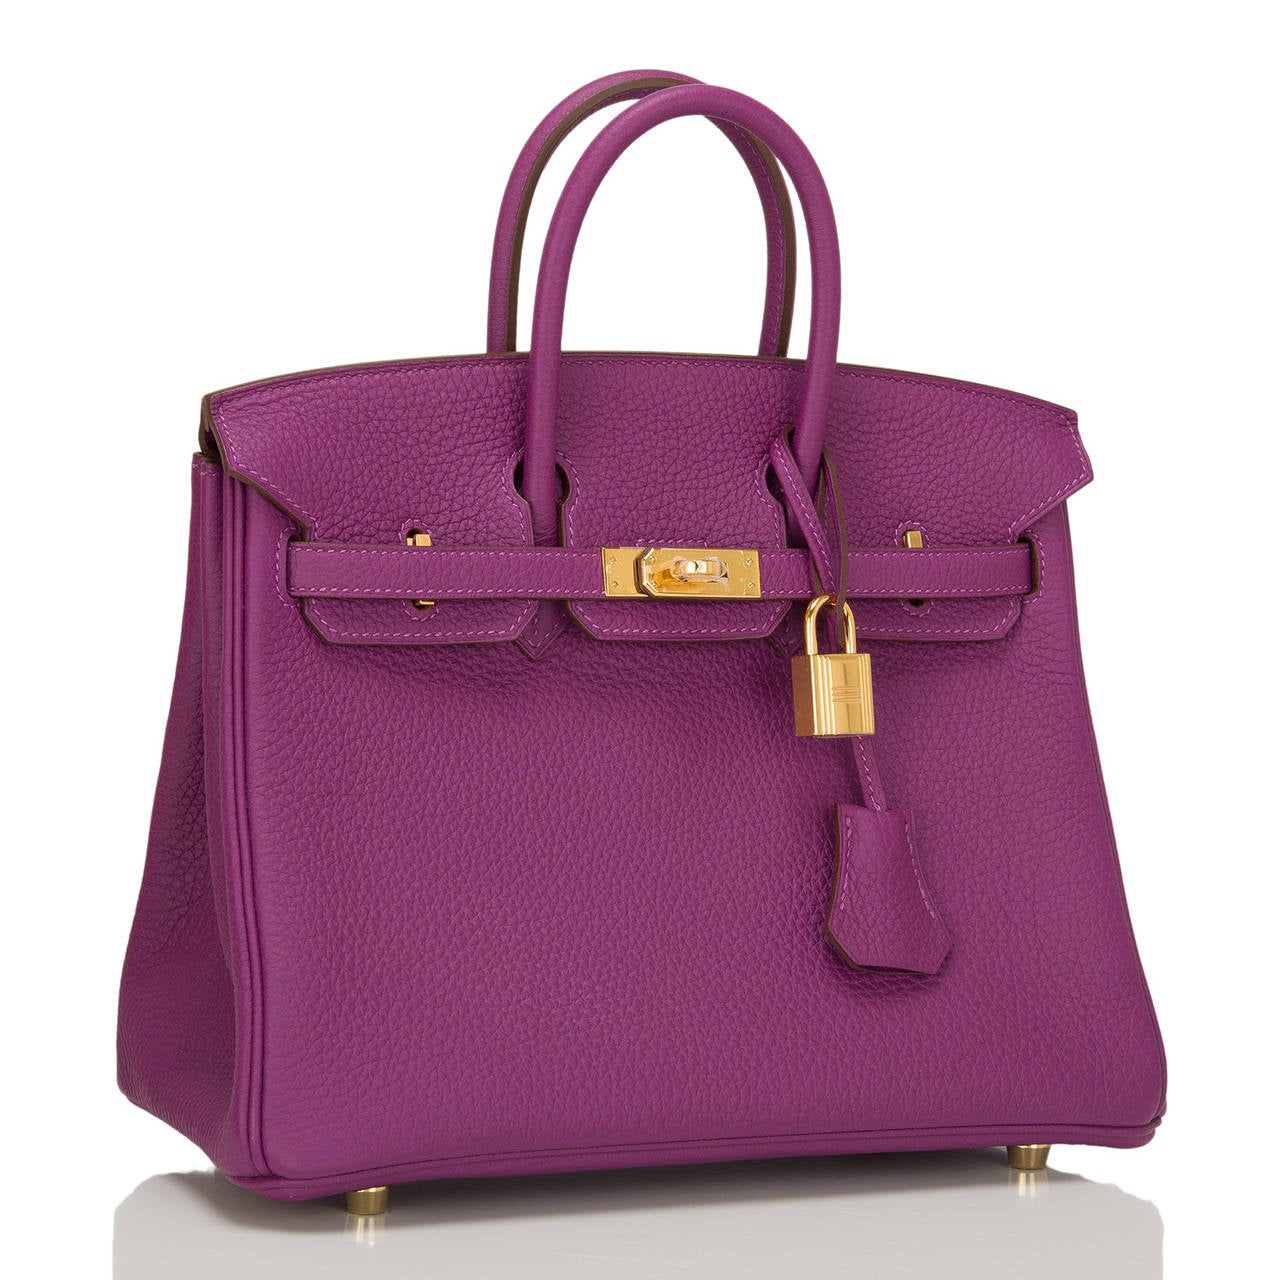 Hermes Anemone Birkin 25cm in togo (bull) with gold hardware.

This Birkin features tonal stitching, front toggle closure, clochette with lock and two keys, and double rolled handles. The interior is lined in Anemone chevre with one zip pocket